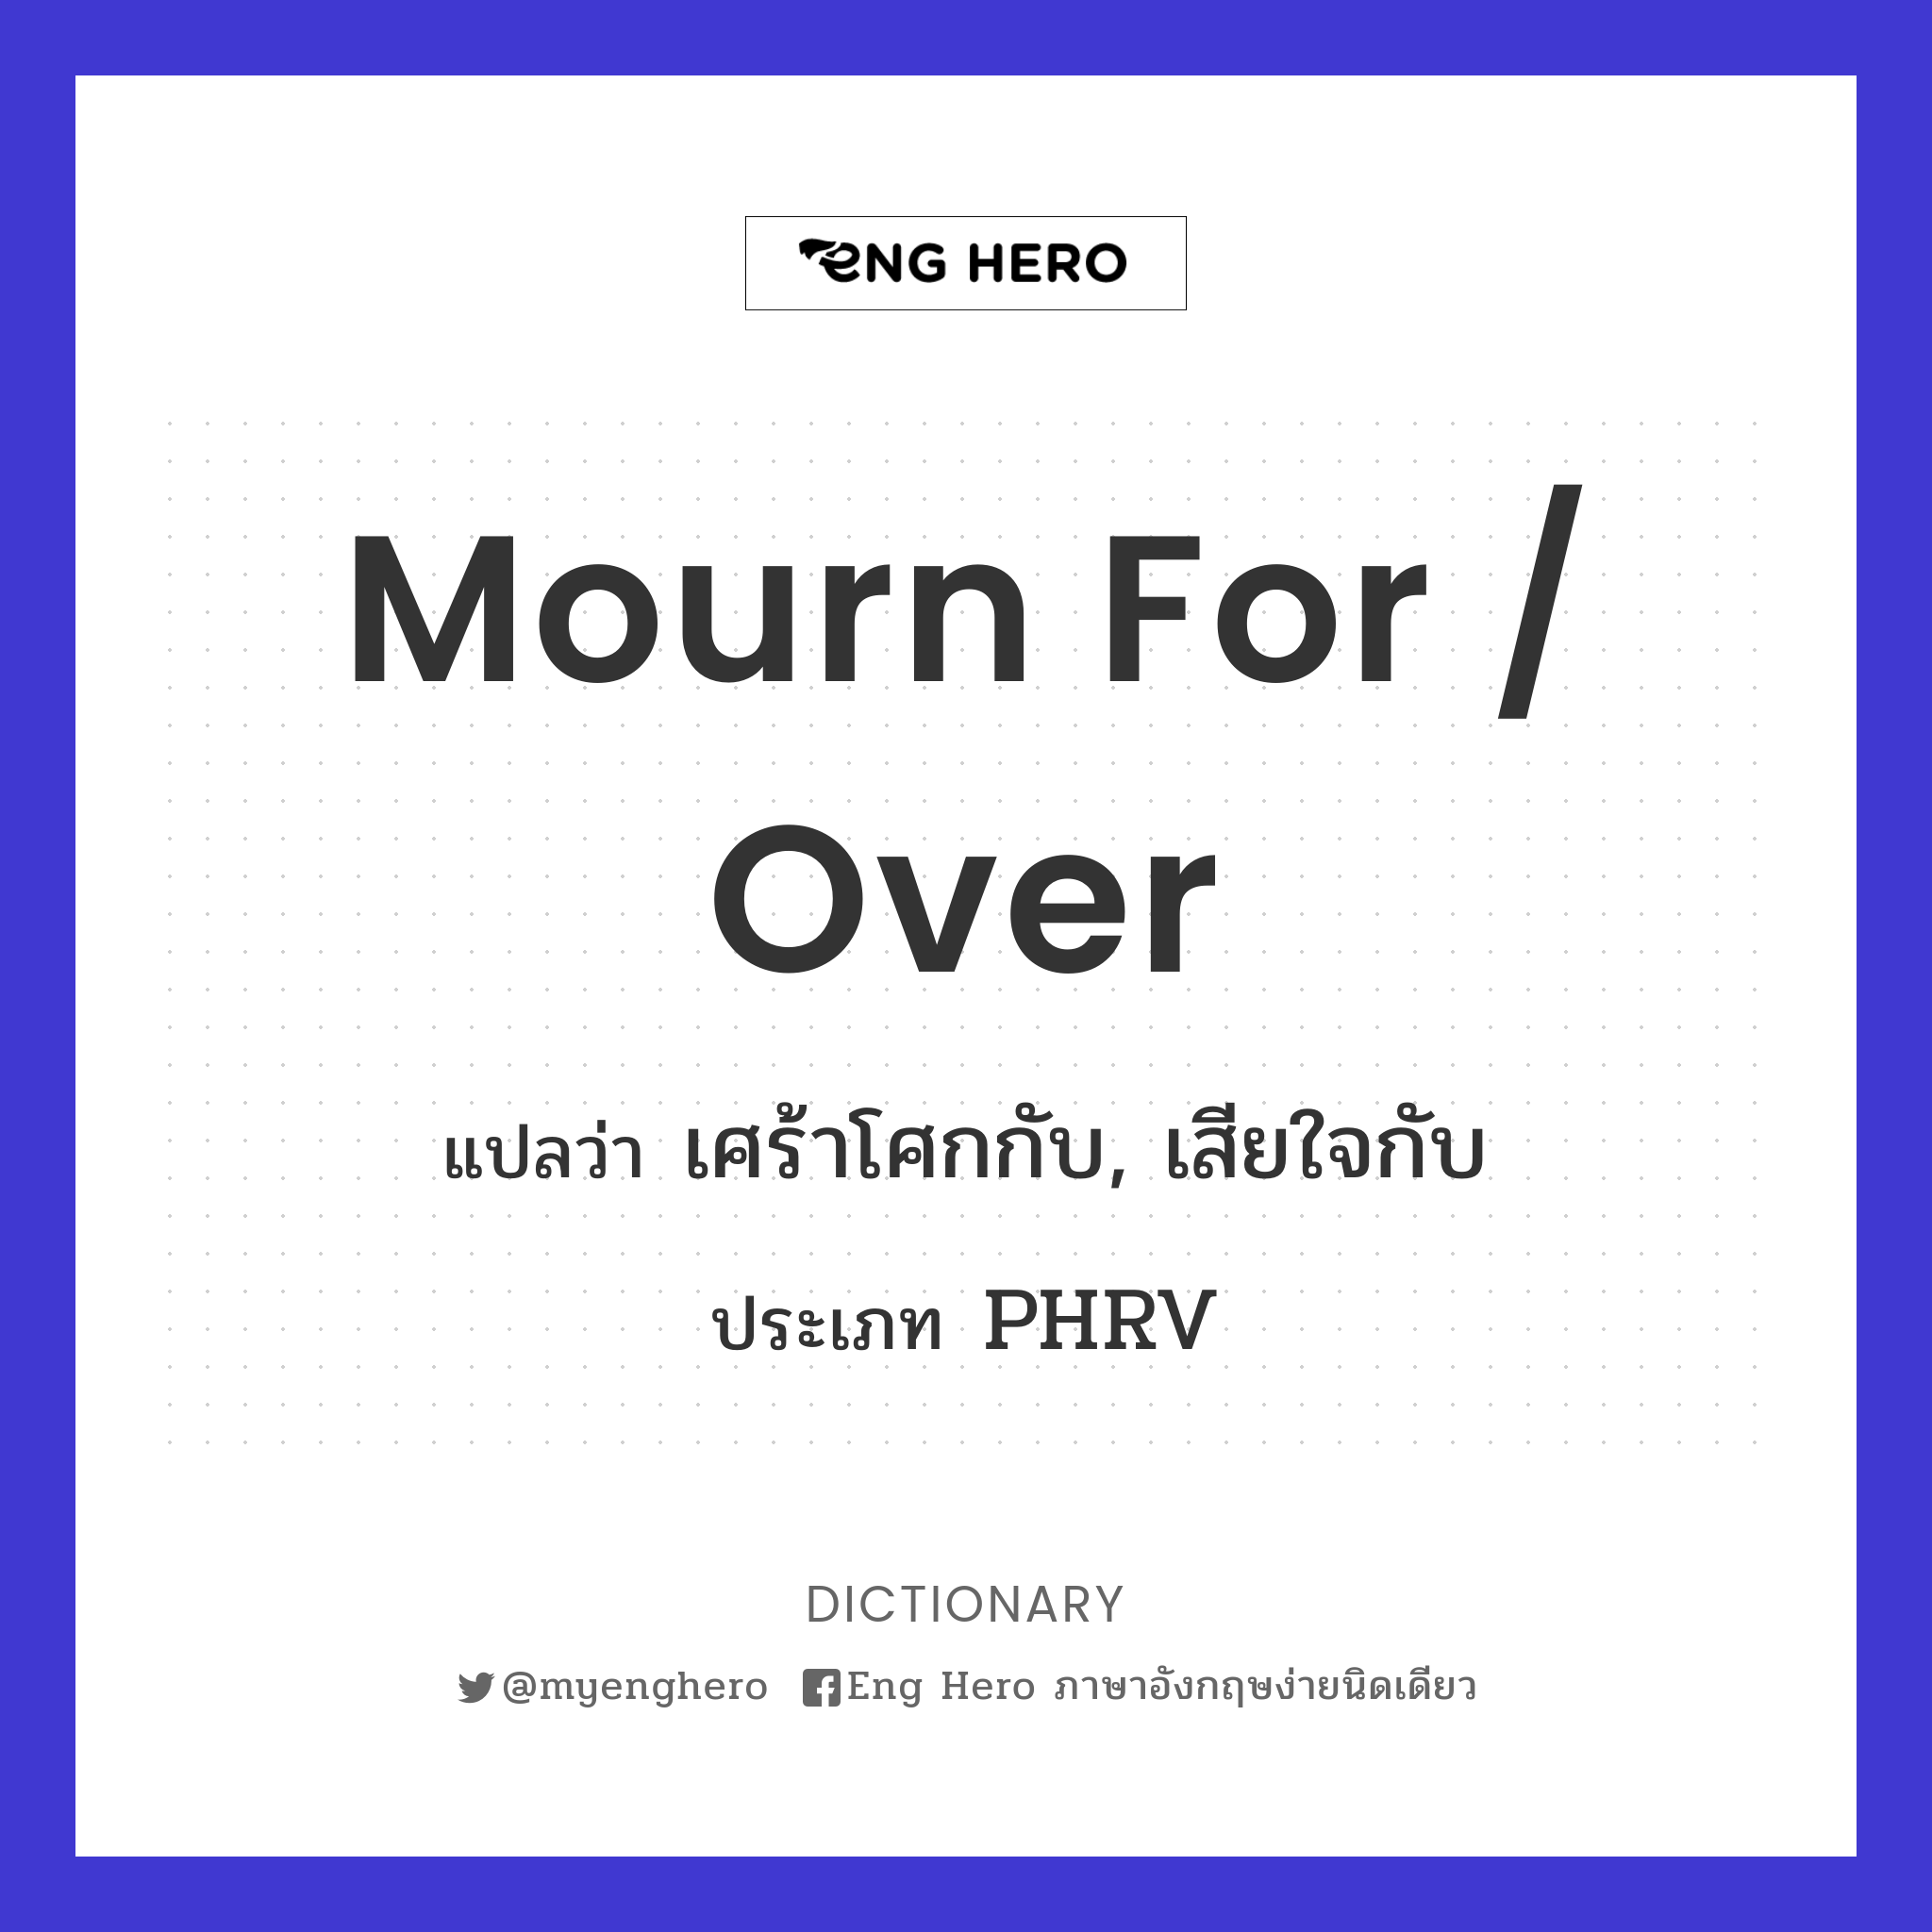 mourn for / over